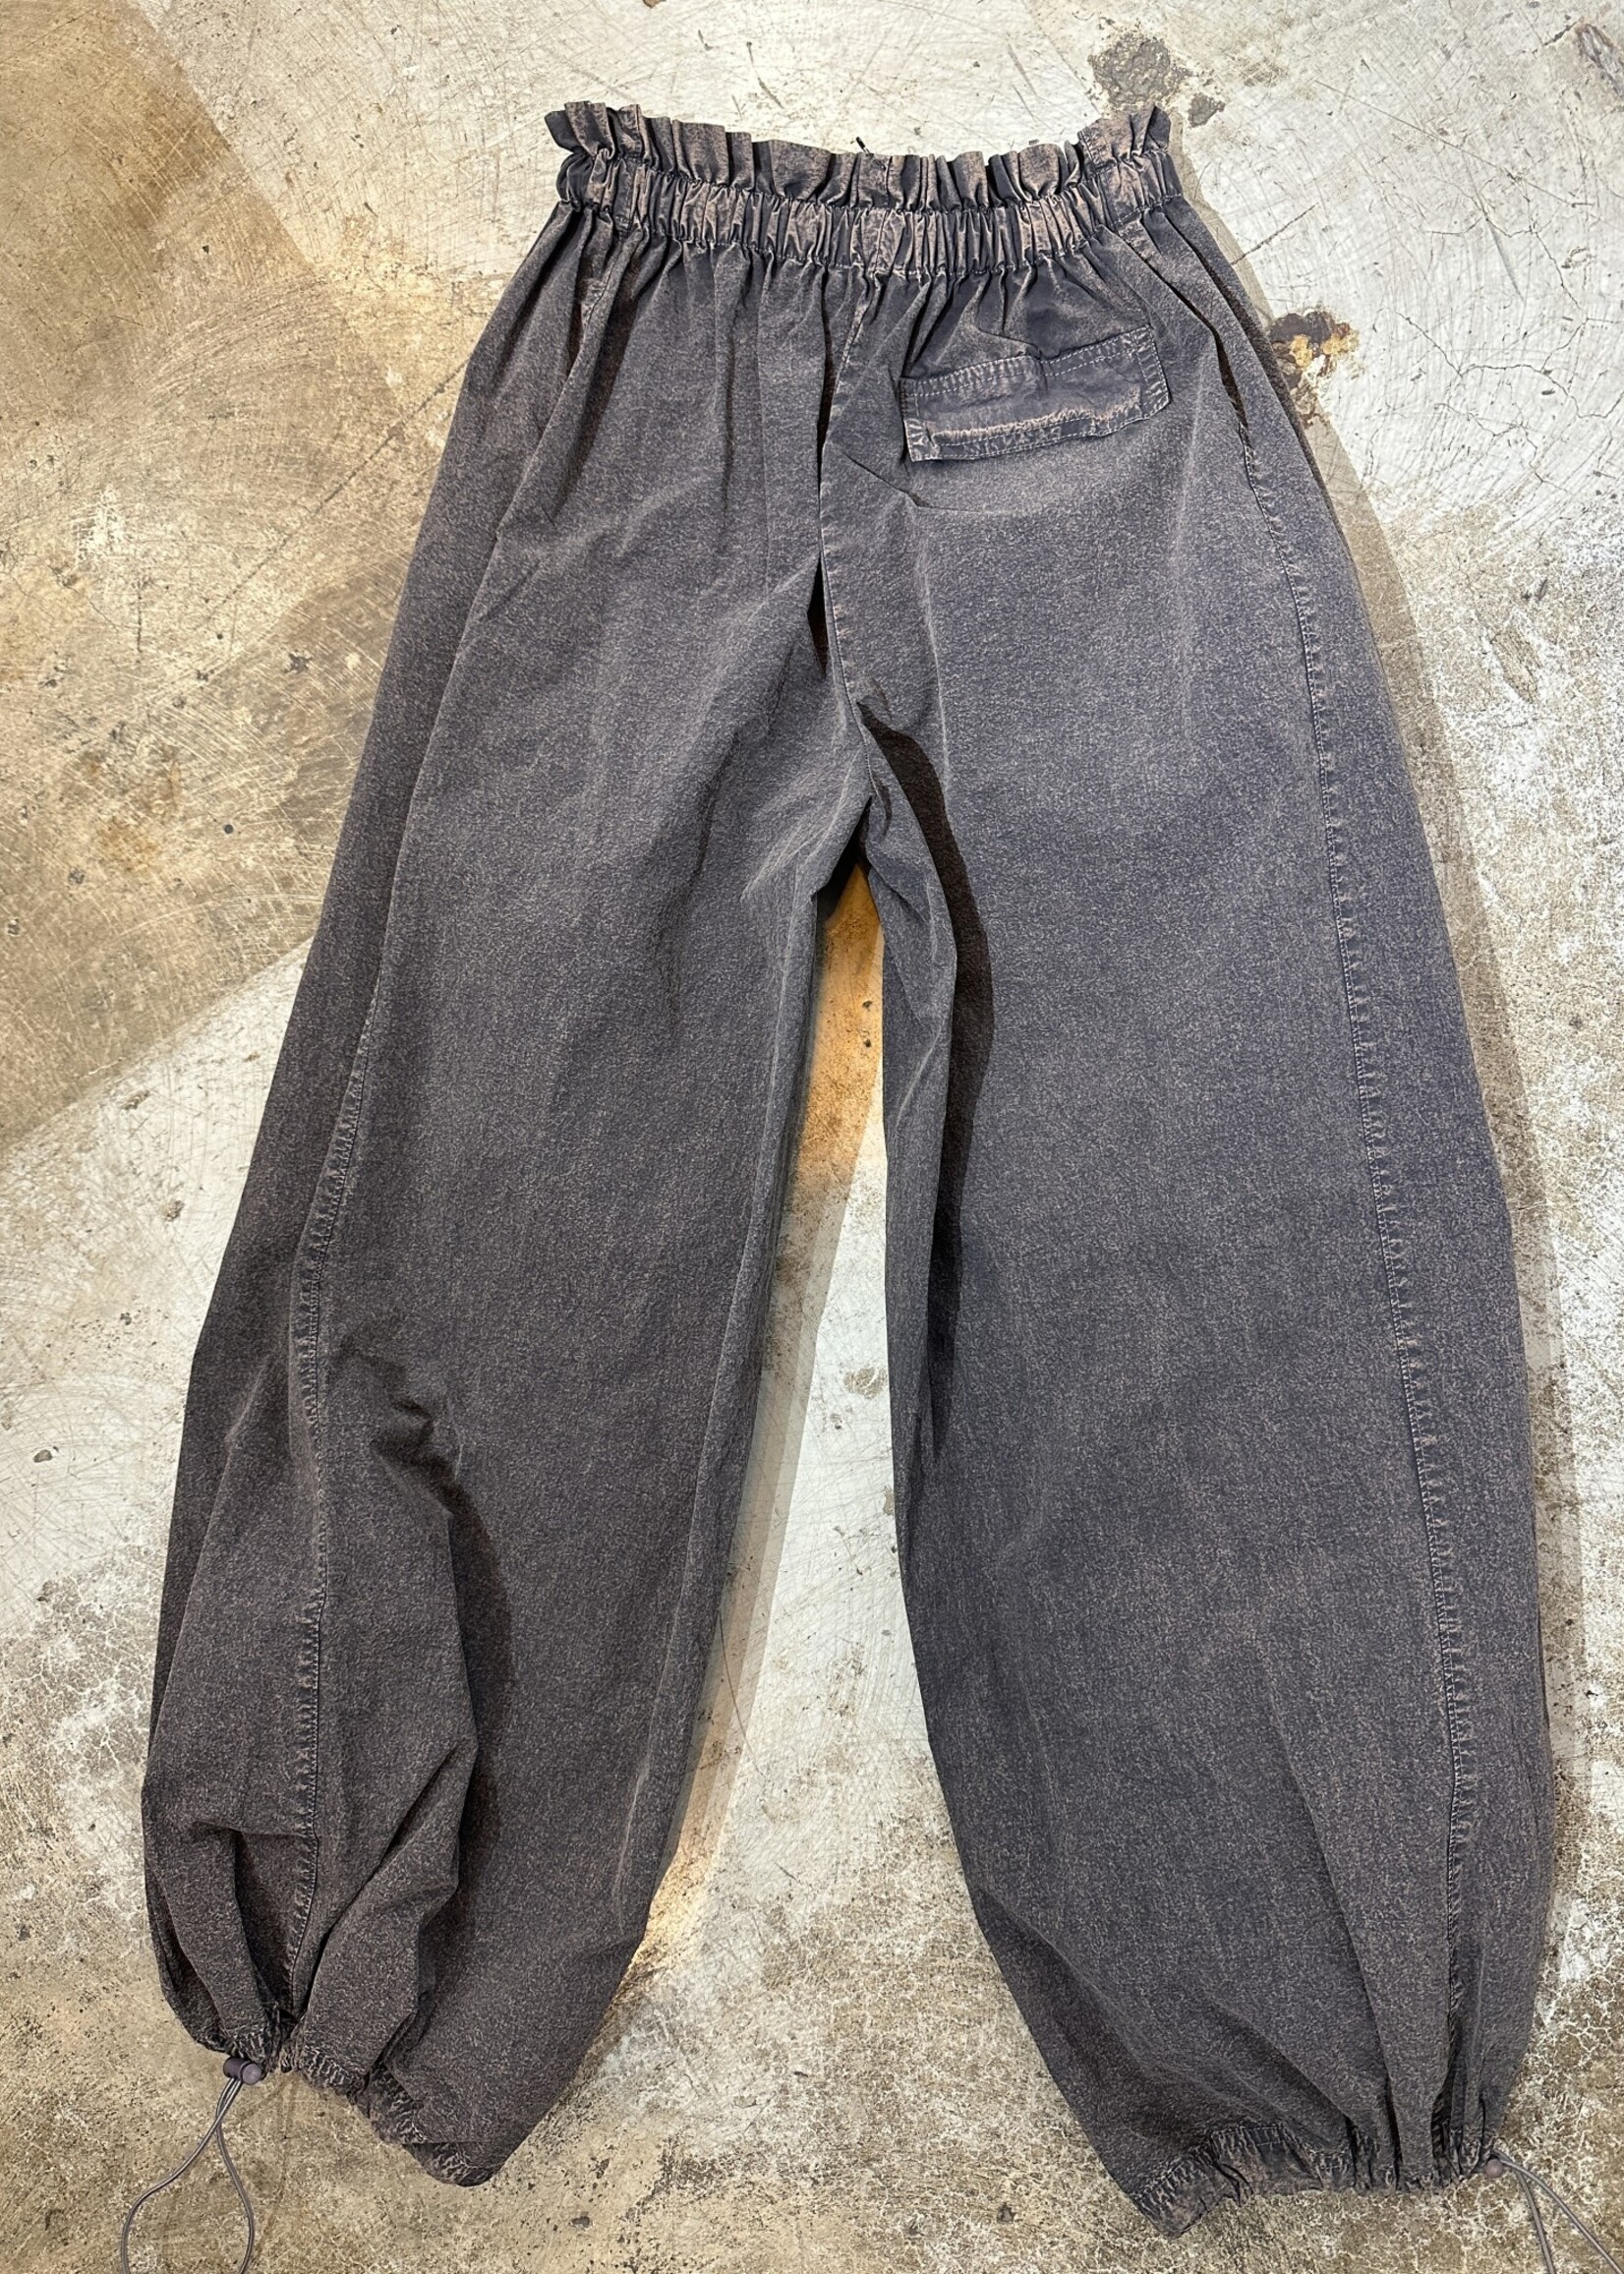 NWT UO Black Brown Washed Parachute Pants S 26